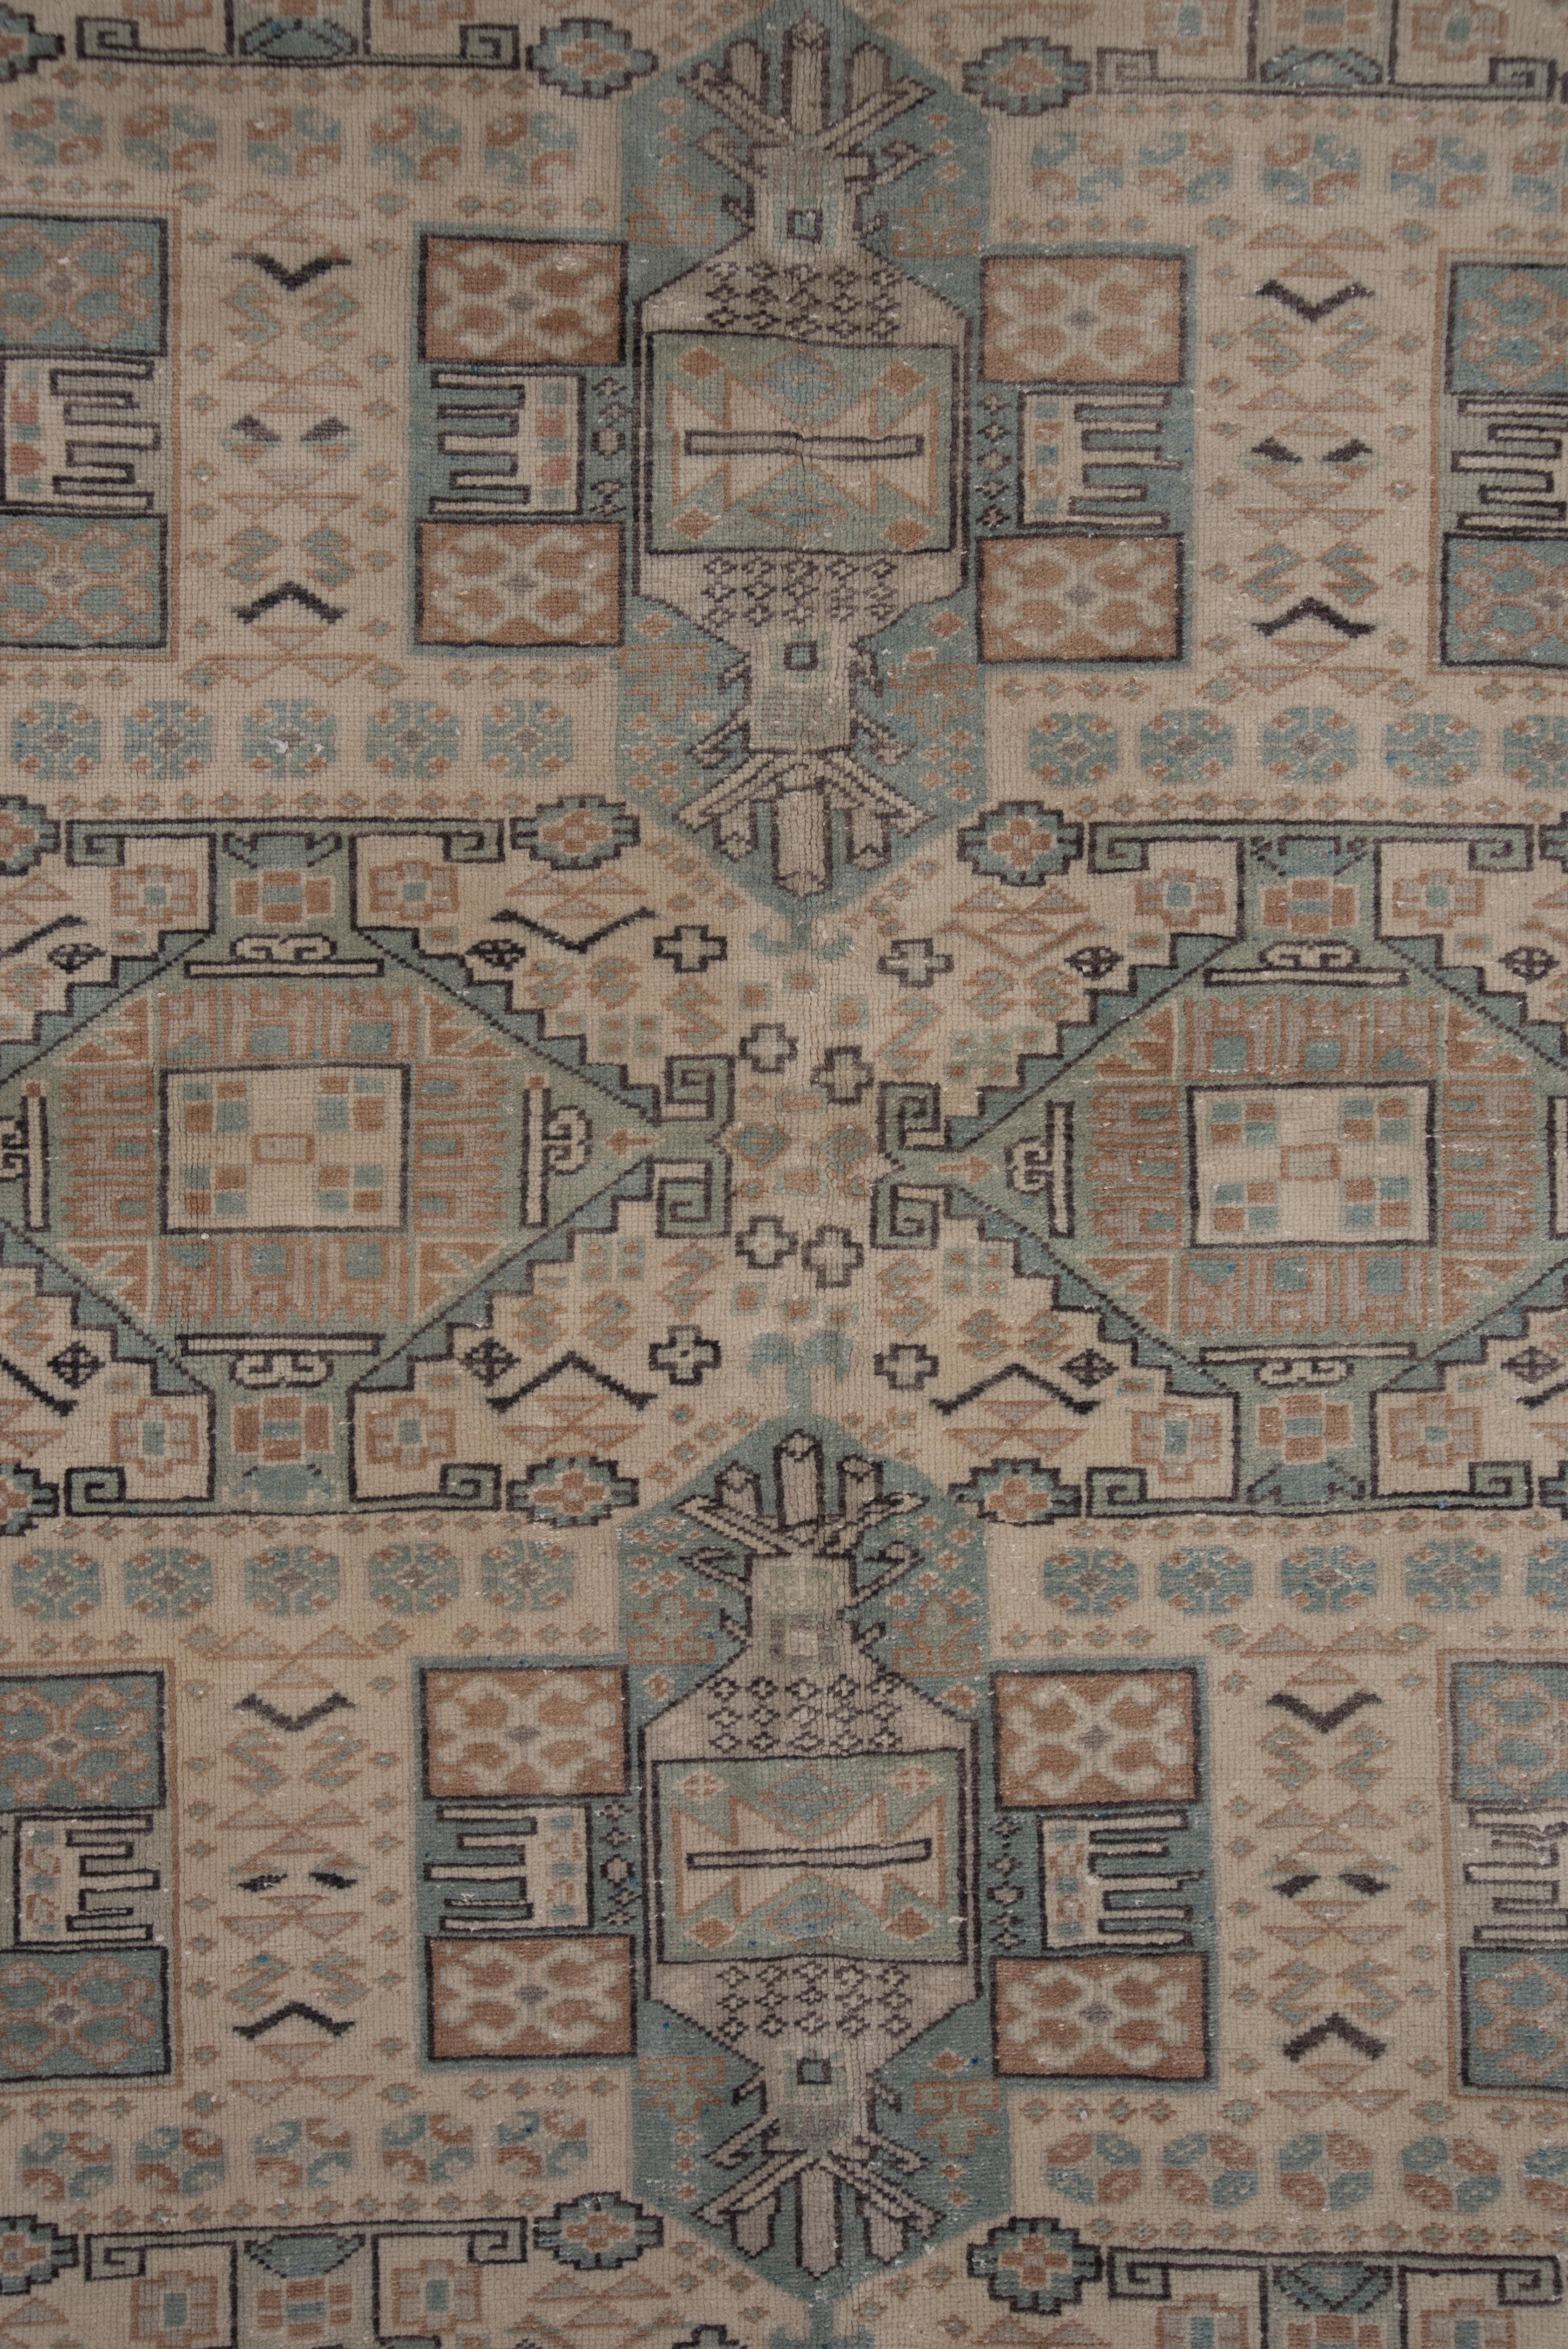 The almond ivory field displays an unusual quasi-Caucasian allover geometric pattern of stepped and hooked lozenges, hexagonal cartouches, rectangles,, rosettes and small fat crosses, all within an color matched border with full flowers and doubly